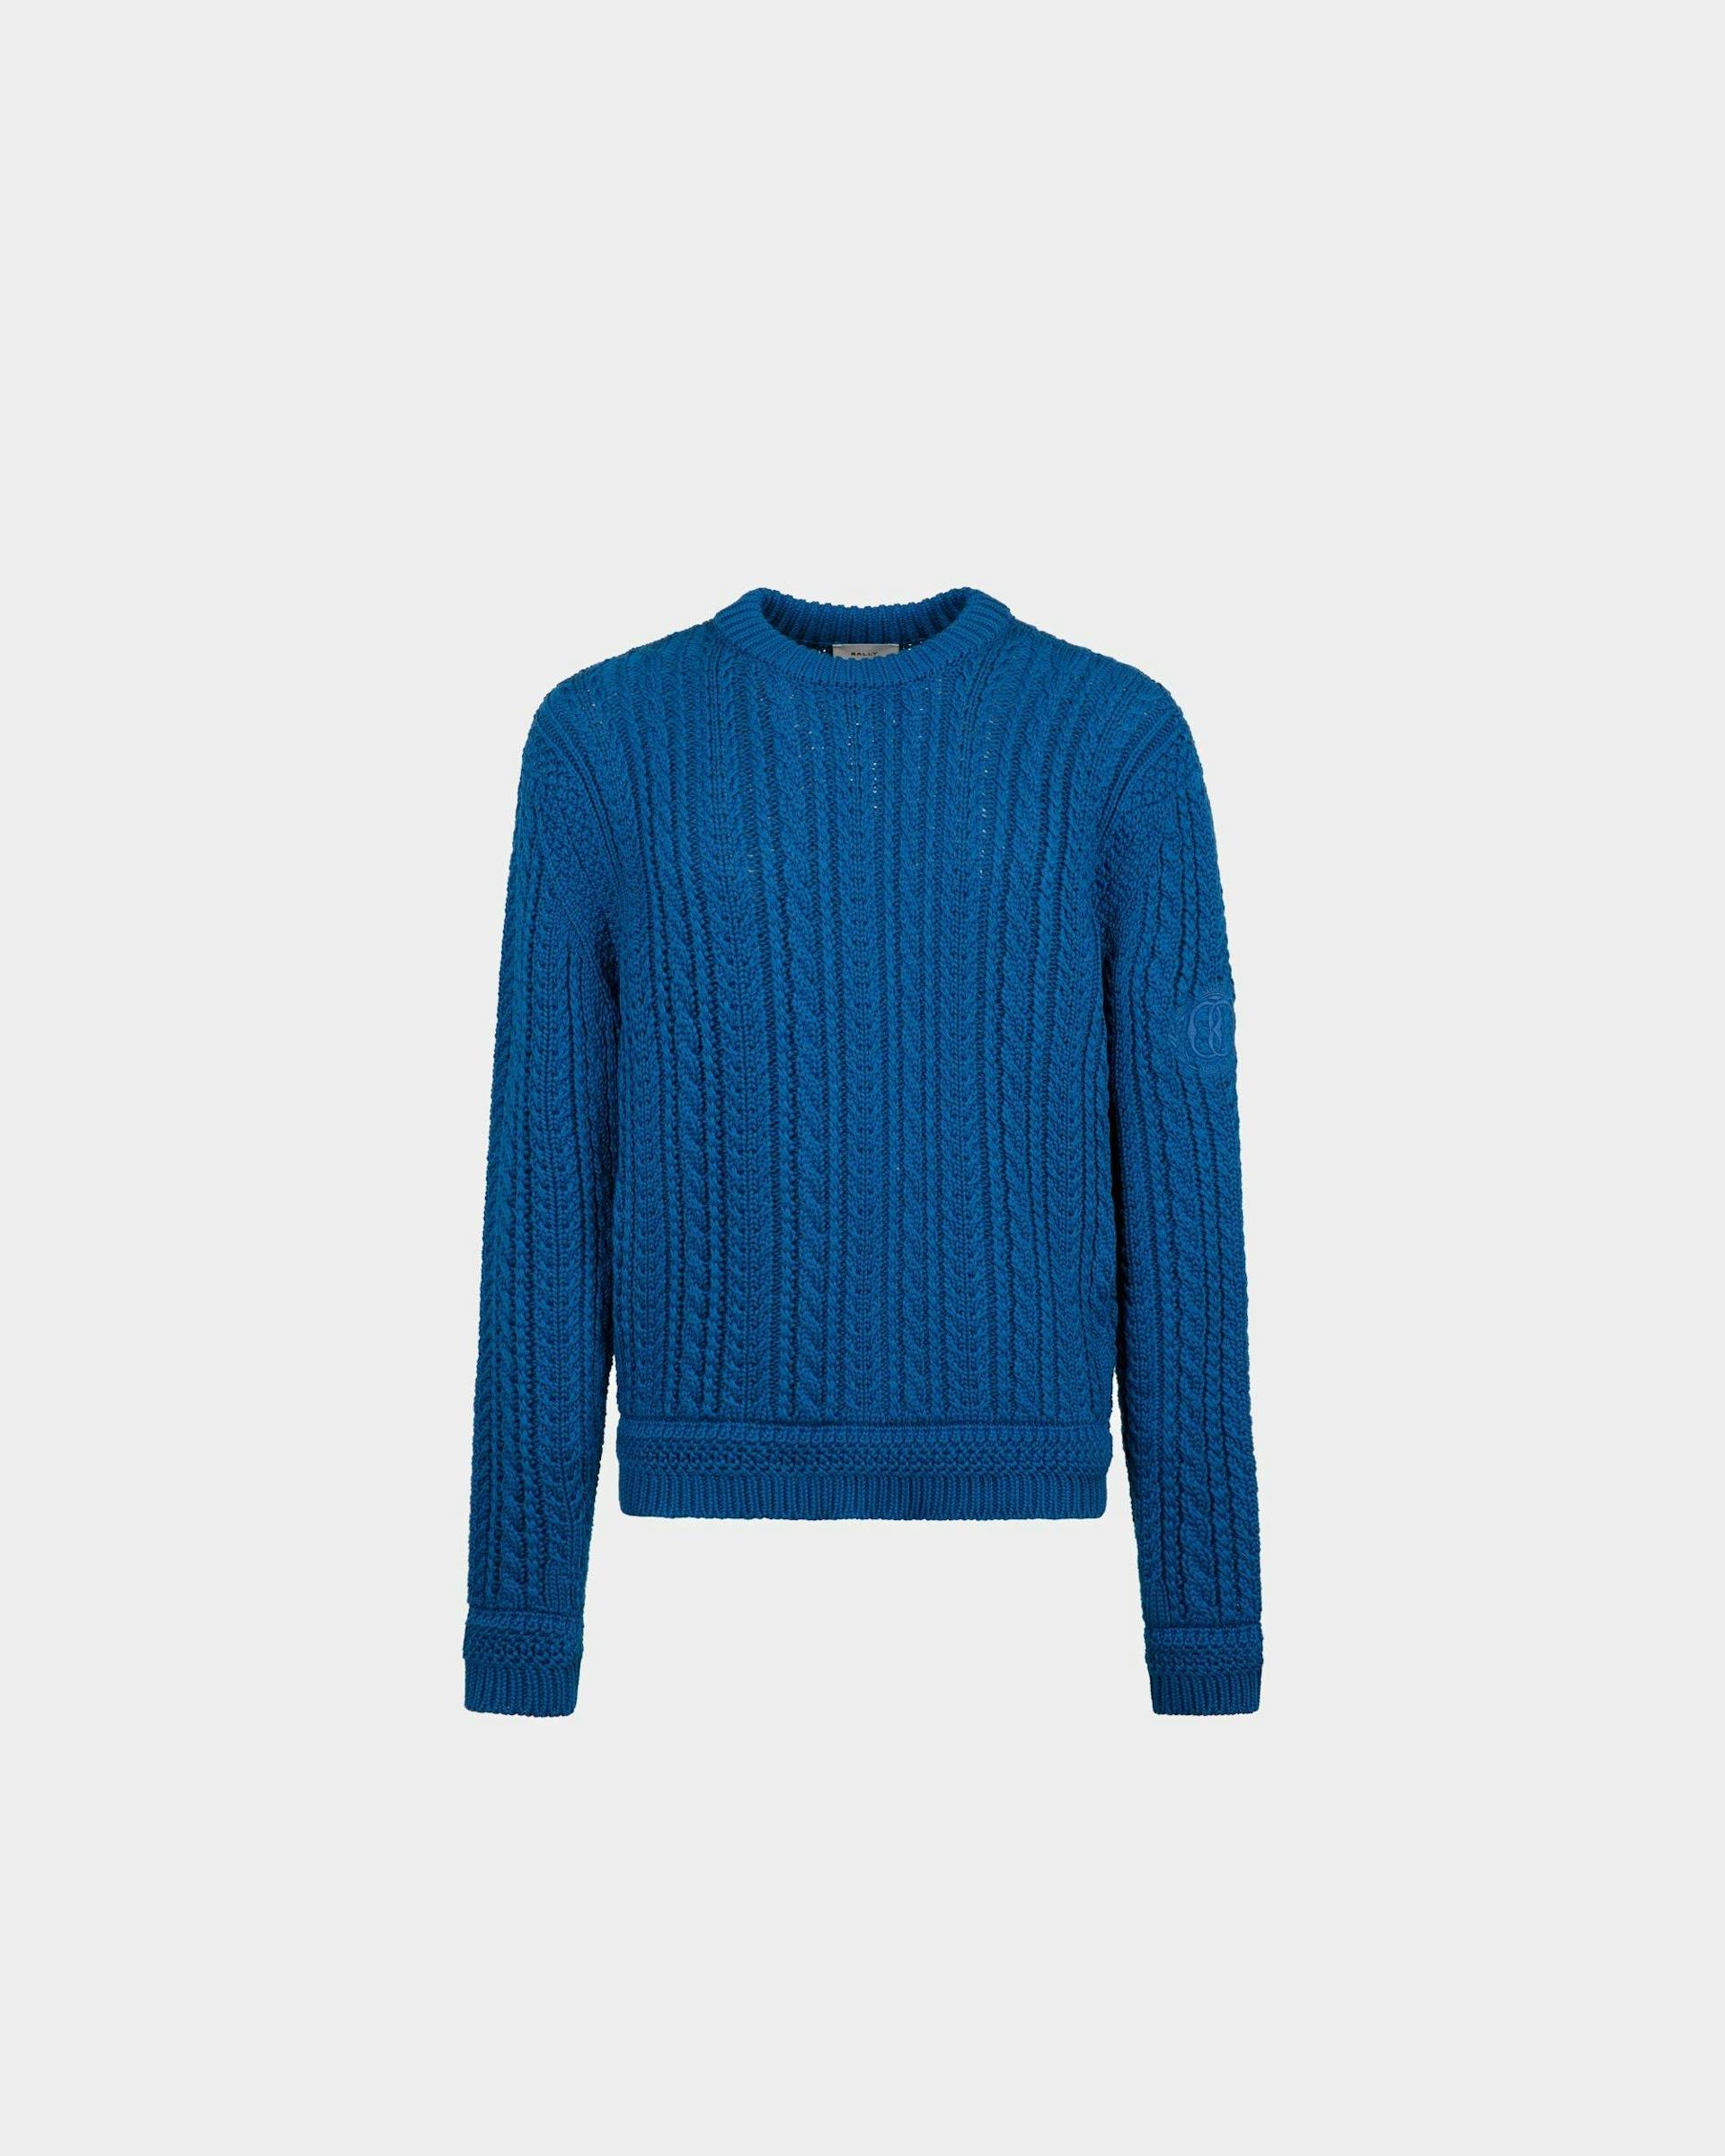 Men's Cable-knit Sweater in Blue Cotton | Bally | Still Life Front